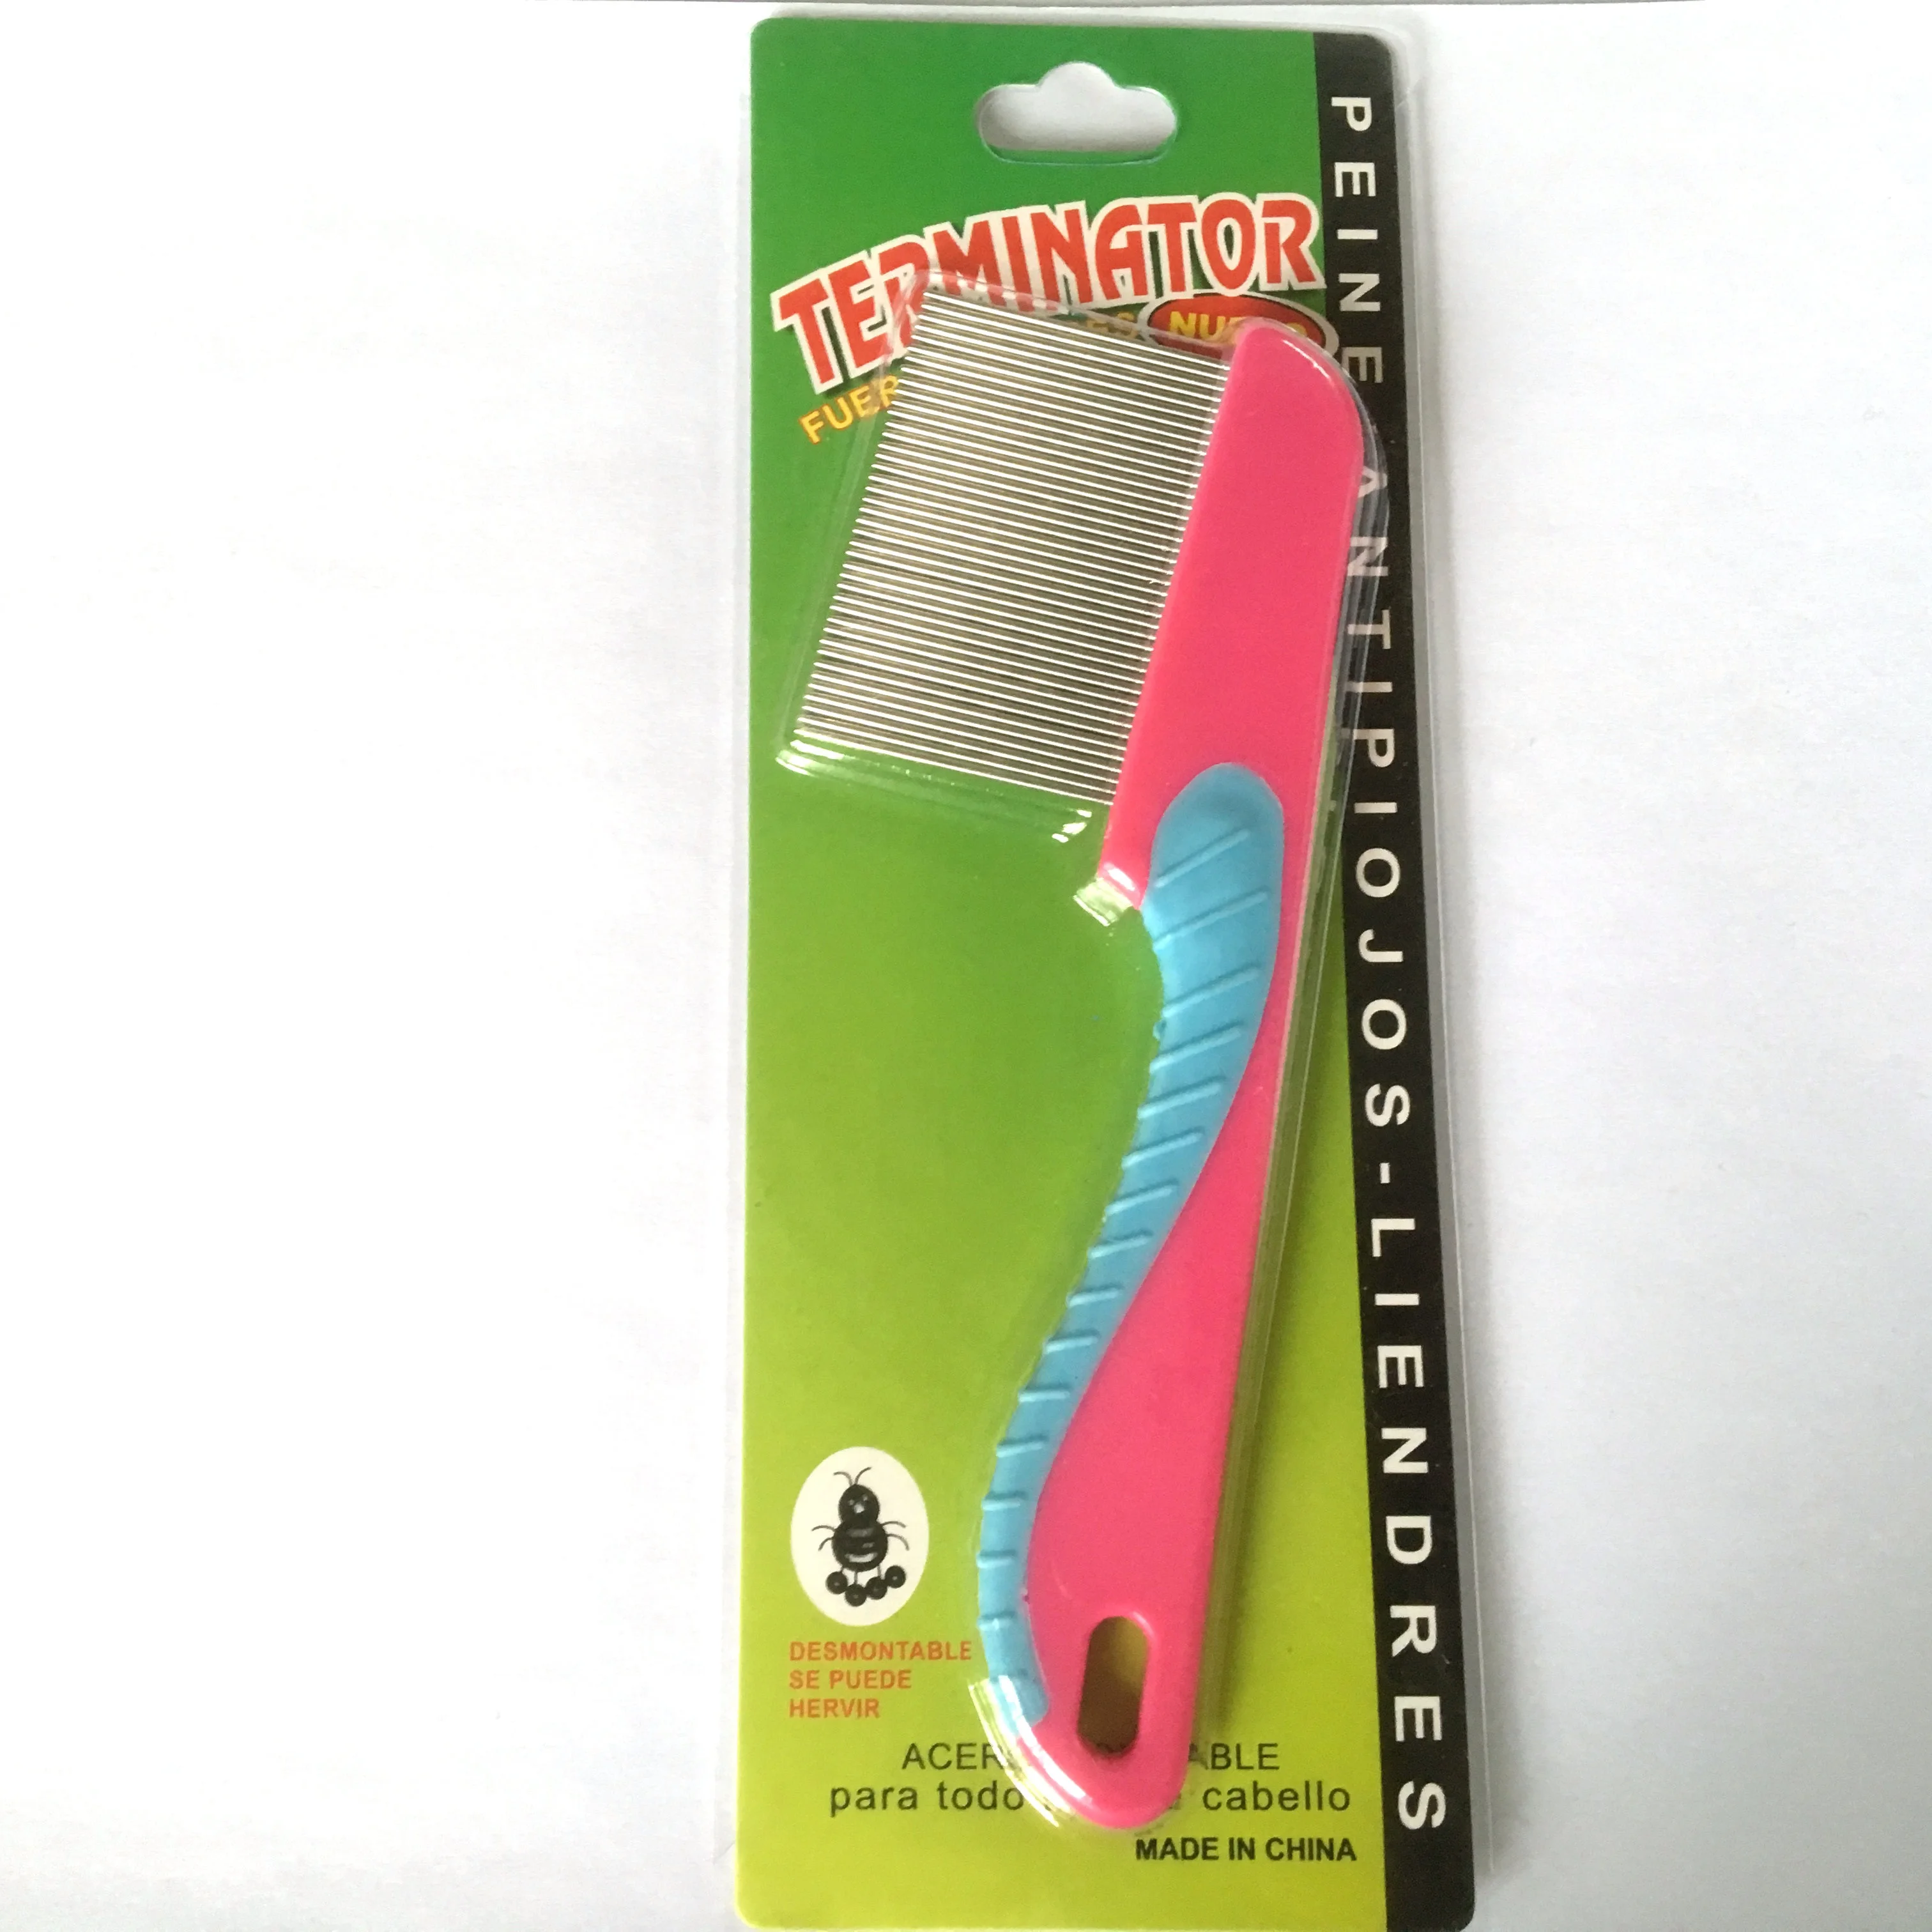 Non Slip Plastic Grip Handle Long Stainless Steel Teeth Lice Nit Louse Tick Flea Control Removing Comb